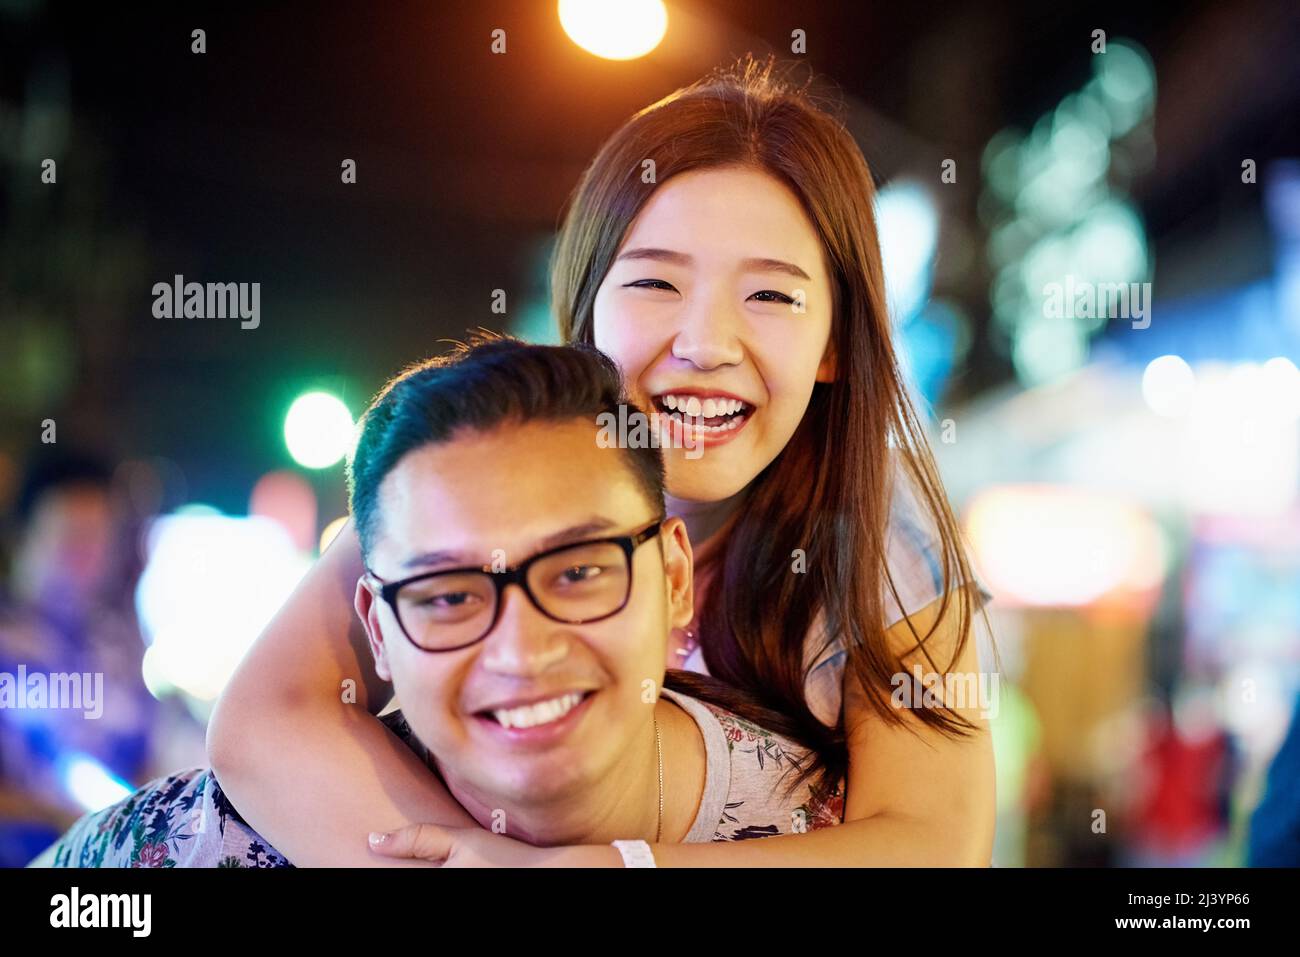 Were having so much fun in the city. Shot of a happy young couple spending the night out in the city. Stock Photo